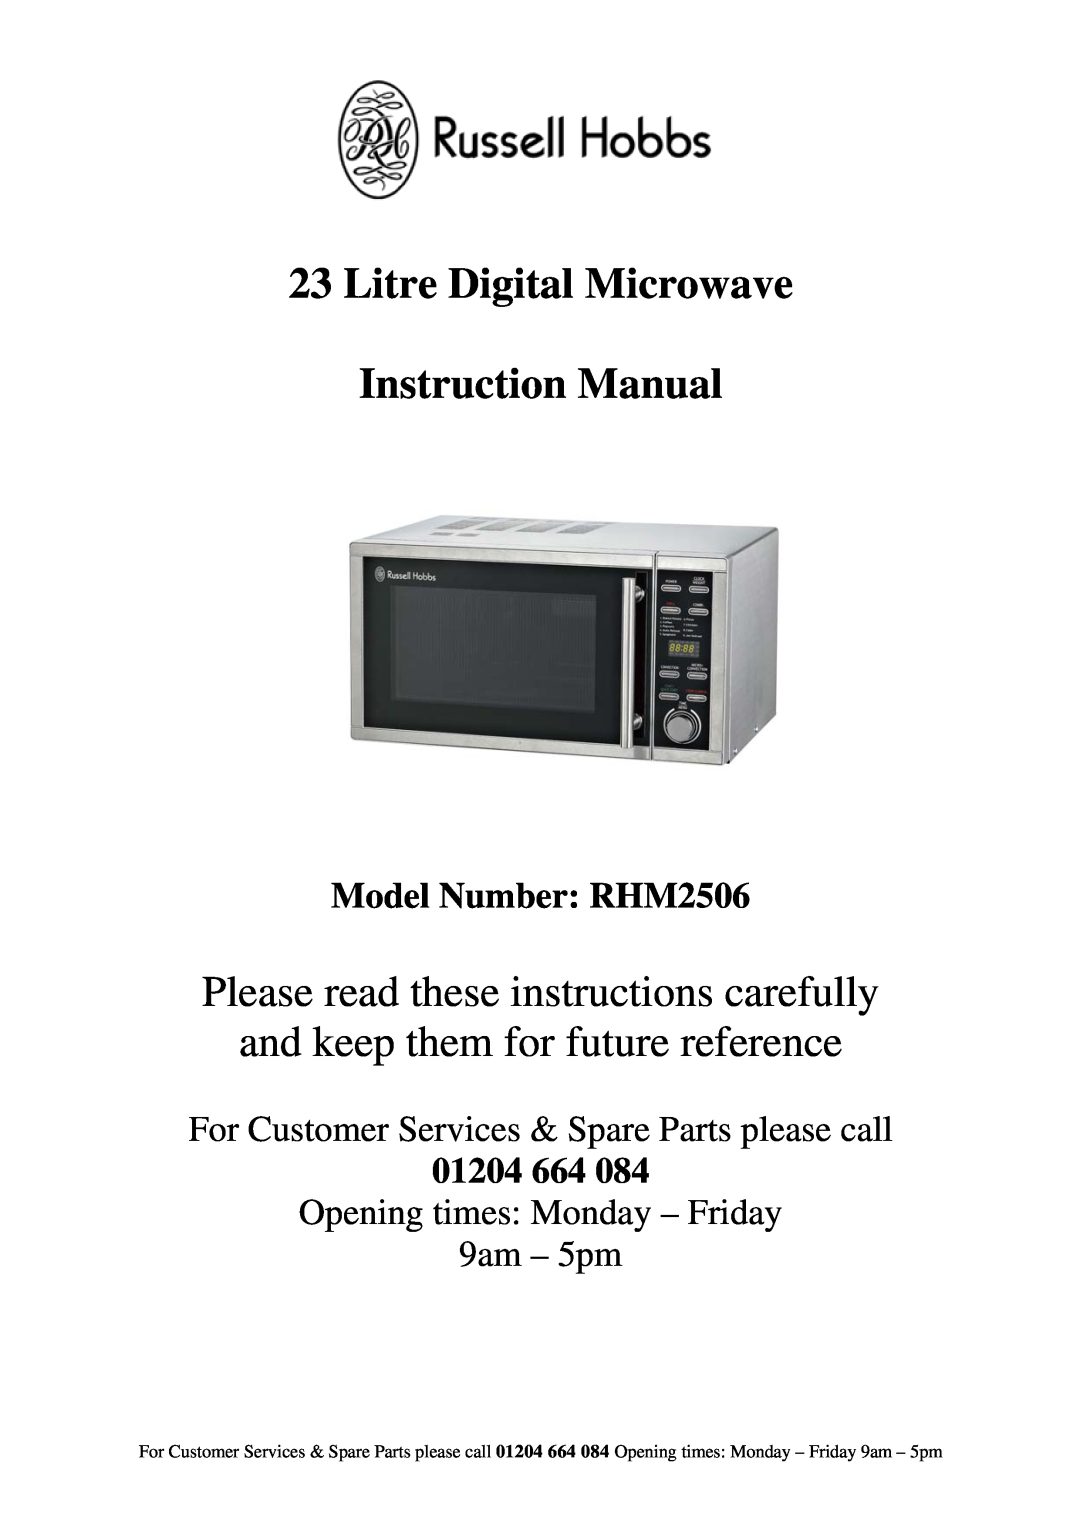 Russell Hobbs RHM2506 instruction manual Please read these instructions carefully, and keep them for future reference 